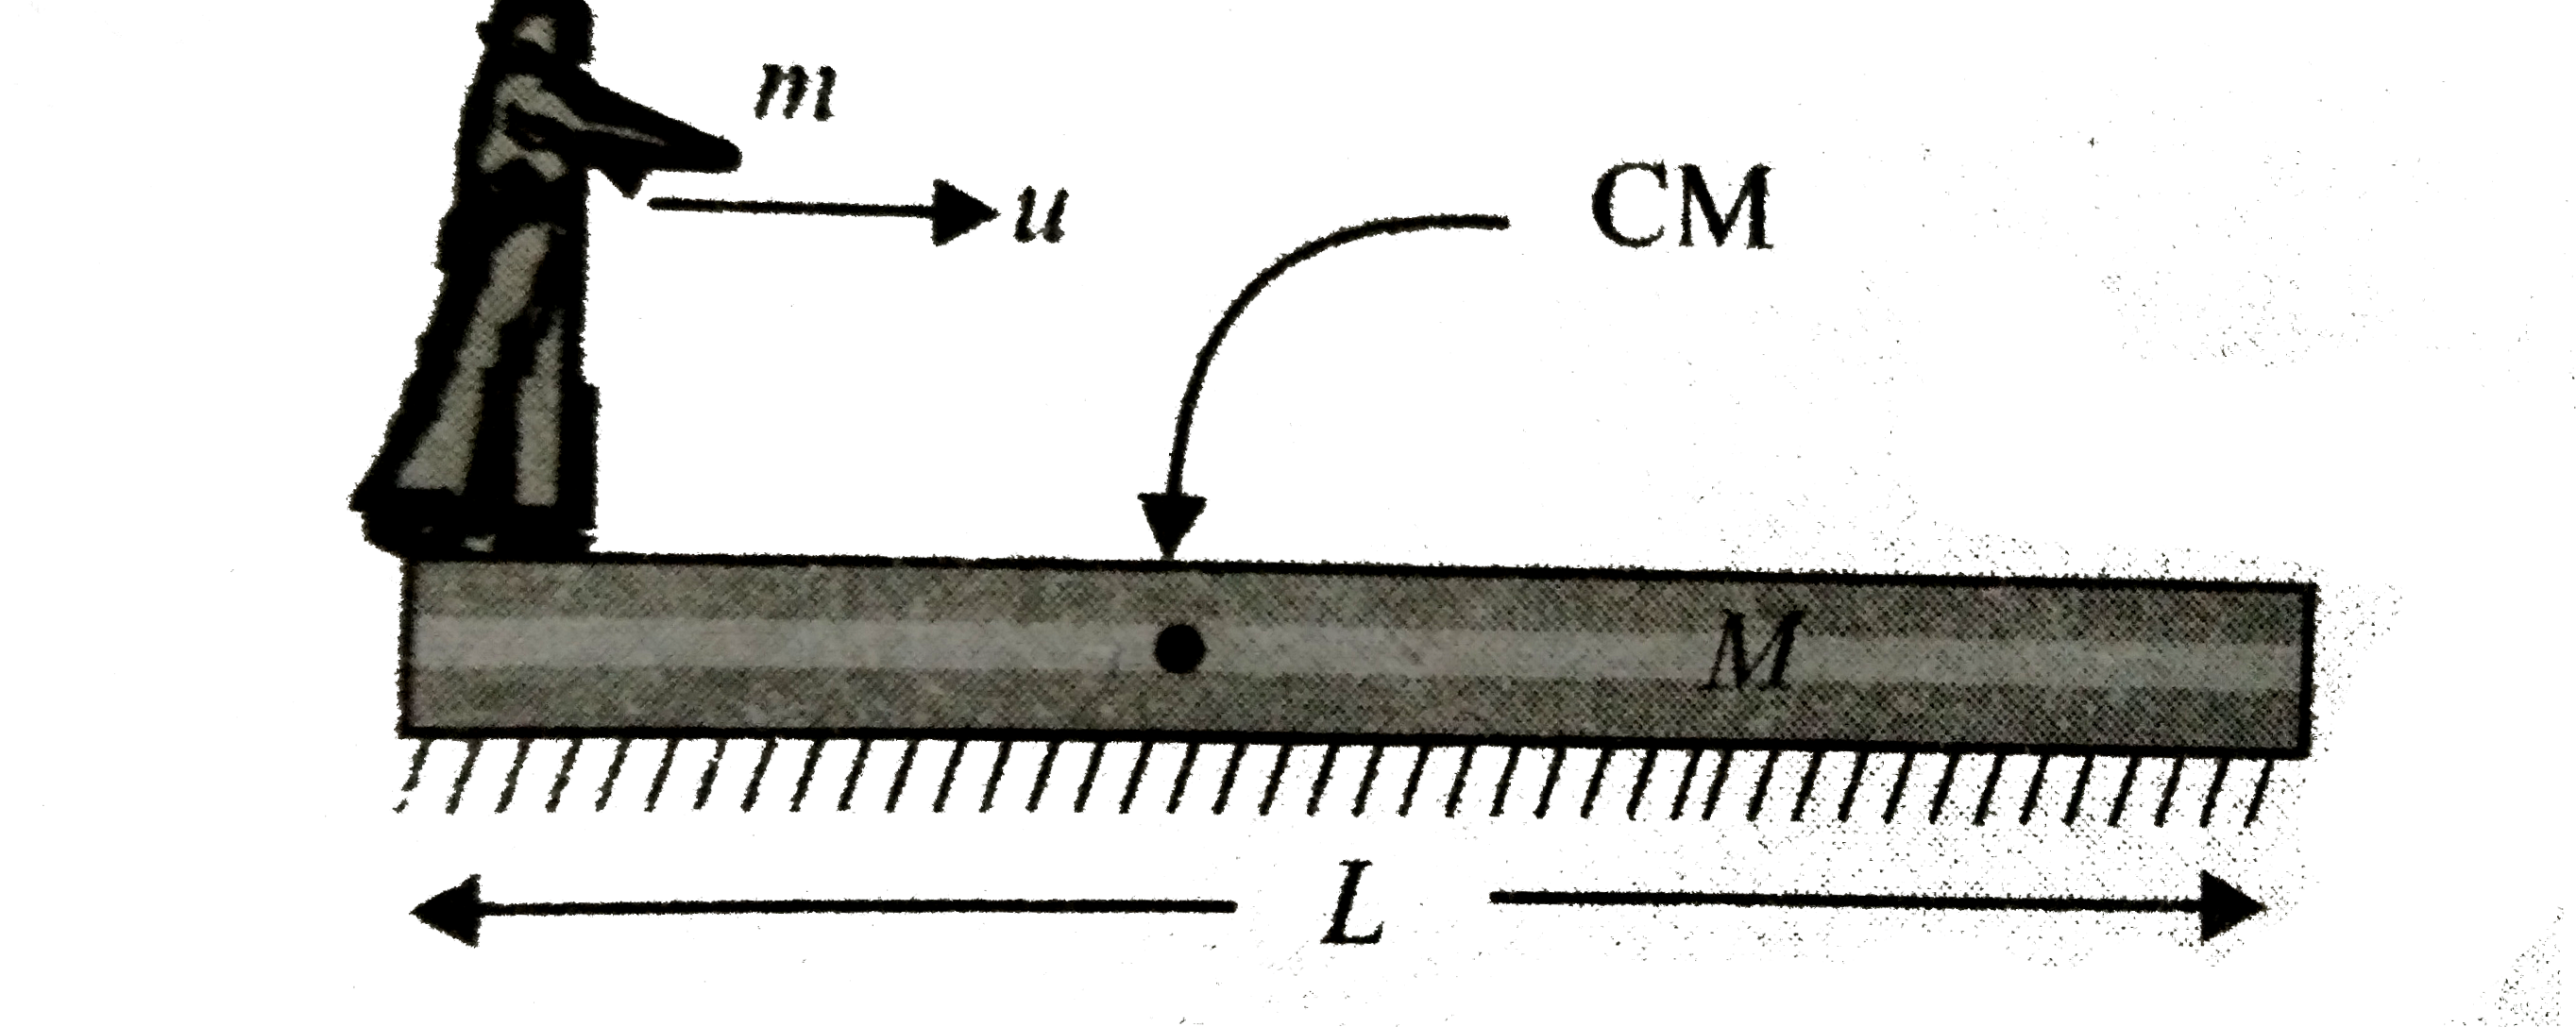 A man  of mass m moves on a plank of mass M with a constant velocity u with respect to the plank, as shown in figure.   a.If the plank rests on  smooth horizontal surface, determine the velocity of the plank.   b If the  man travels a distance L with respect to the plank, find the distance travelled by the plank with respect to the ground.